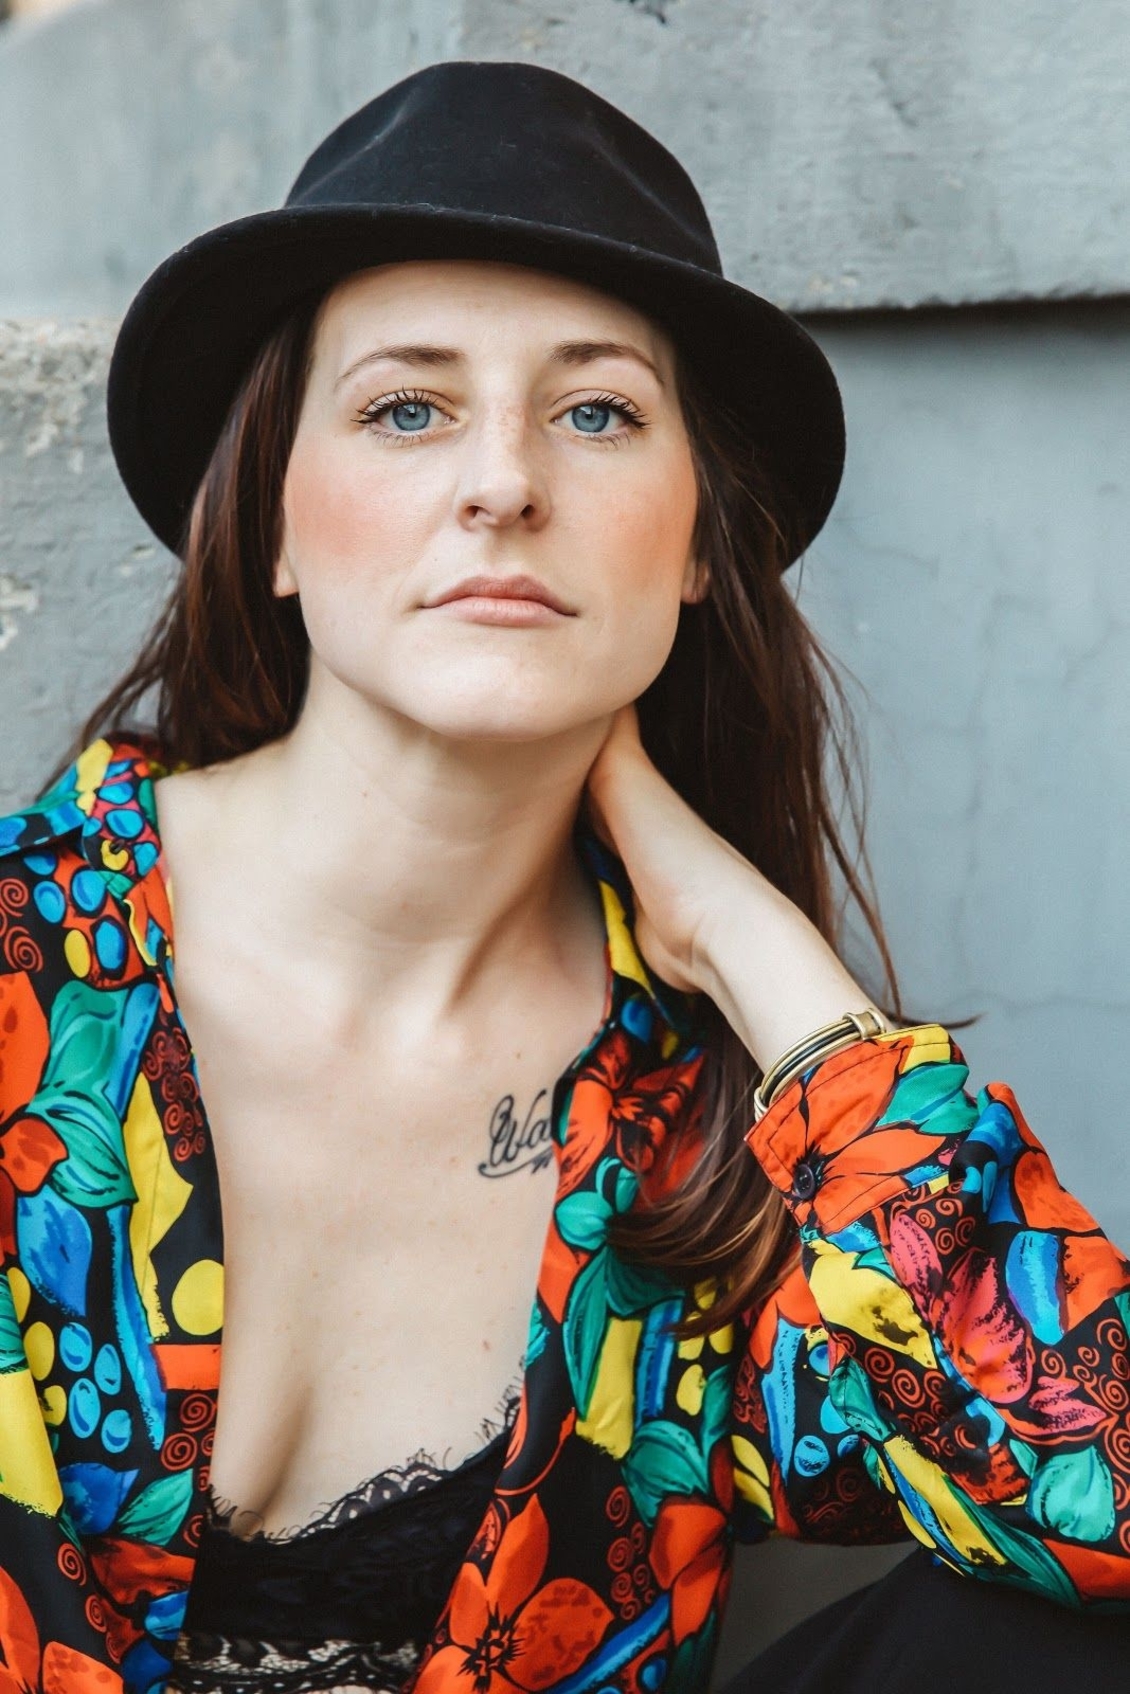 Pickthorn hair stylist Chelsey Pickthorn posing in a black hat and colorful floral blouse